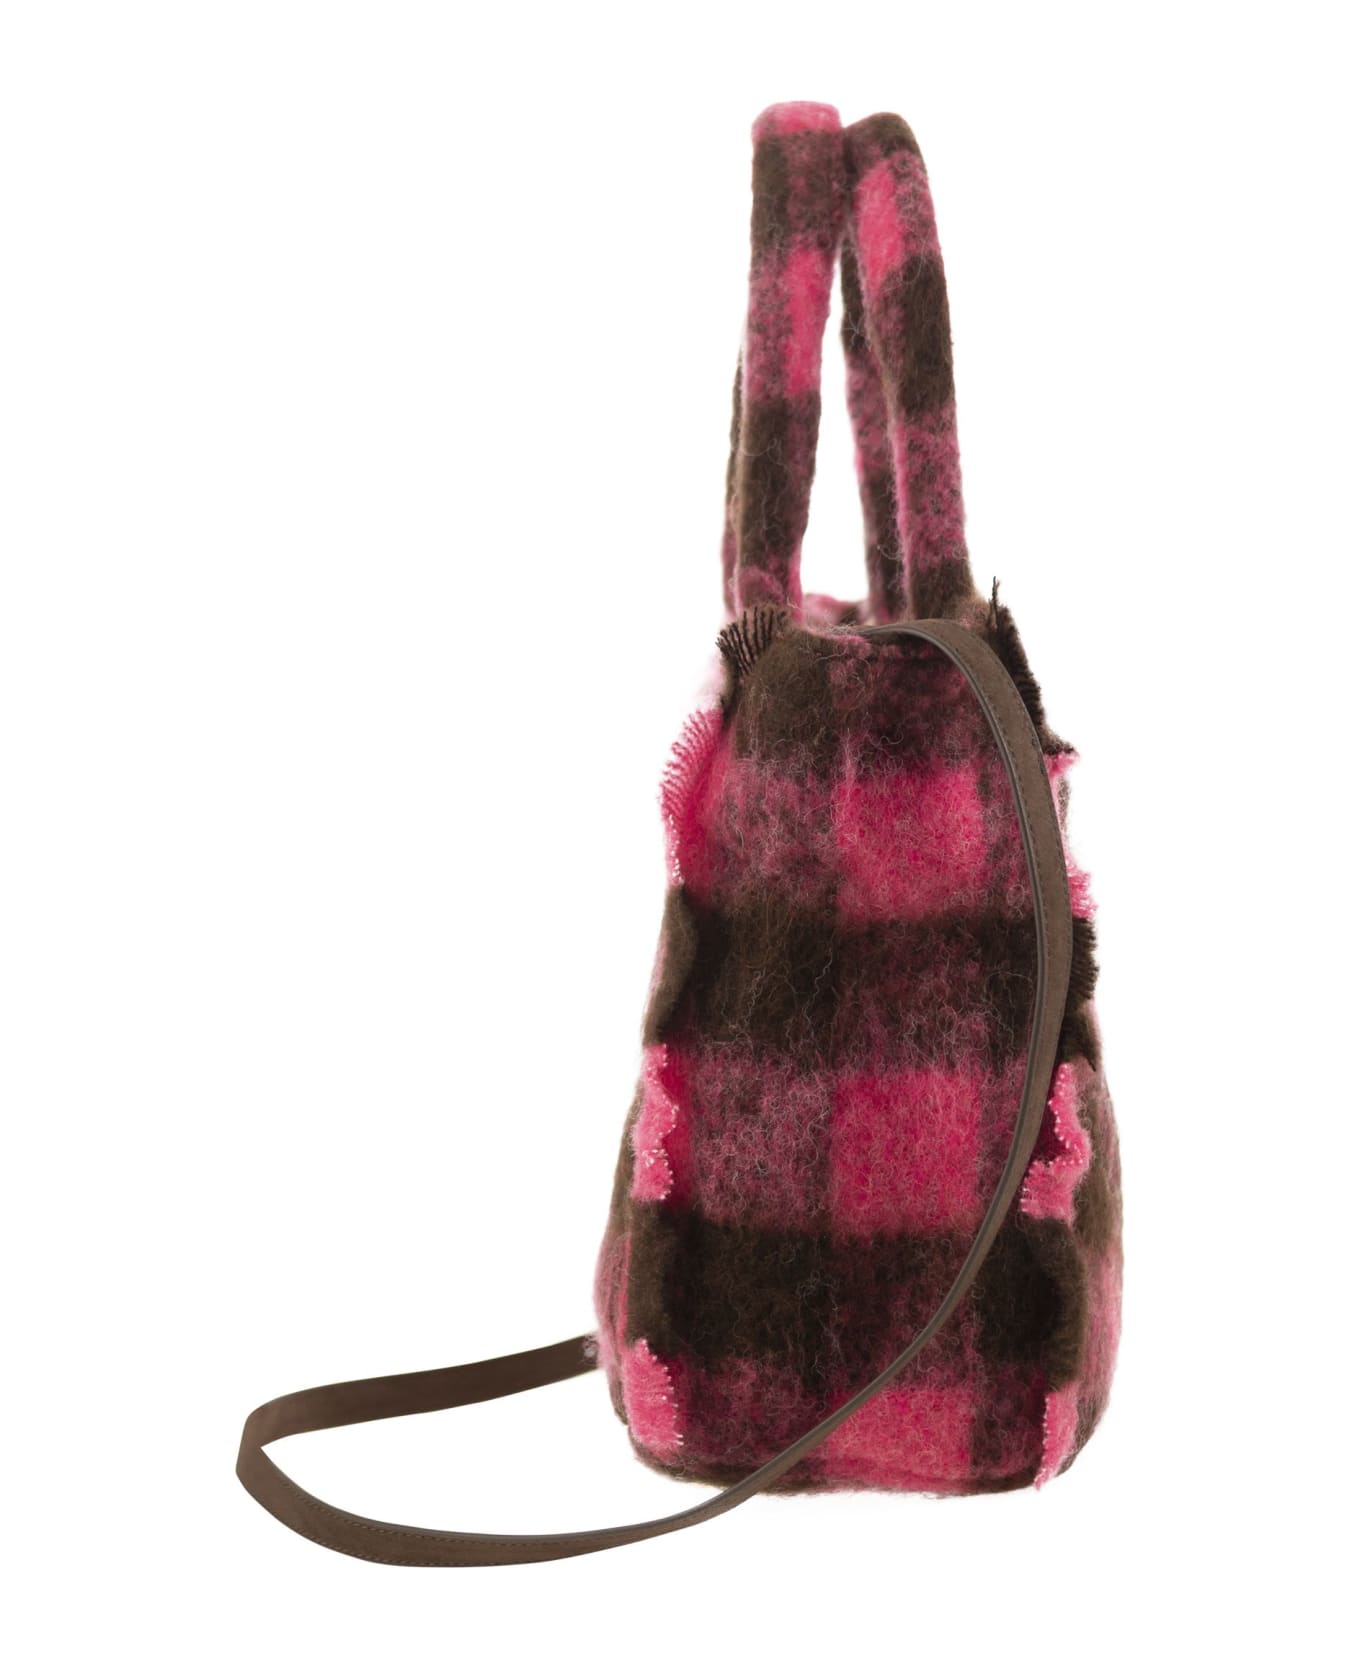 MC2 Saint Barth Wooly Colette Handbag With Fringes And Check Pattern - Fuxia/brown